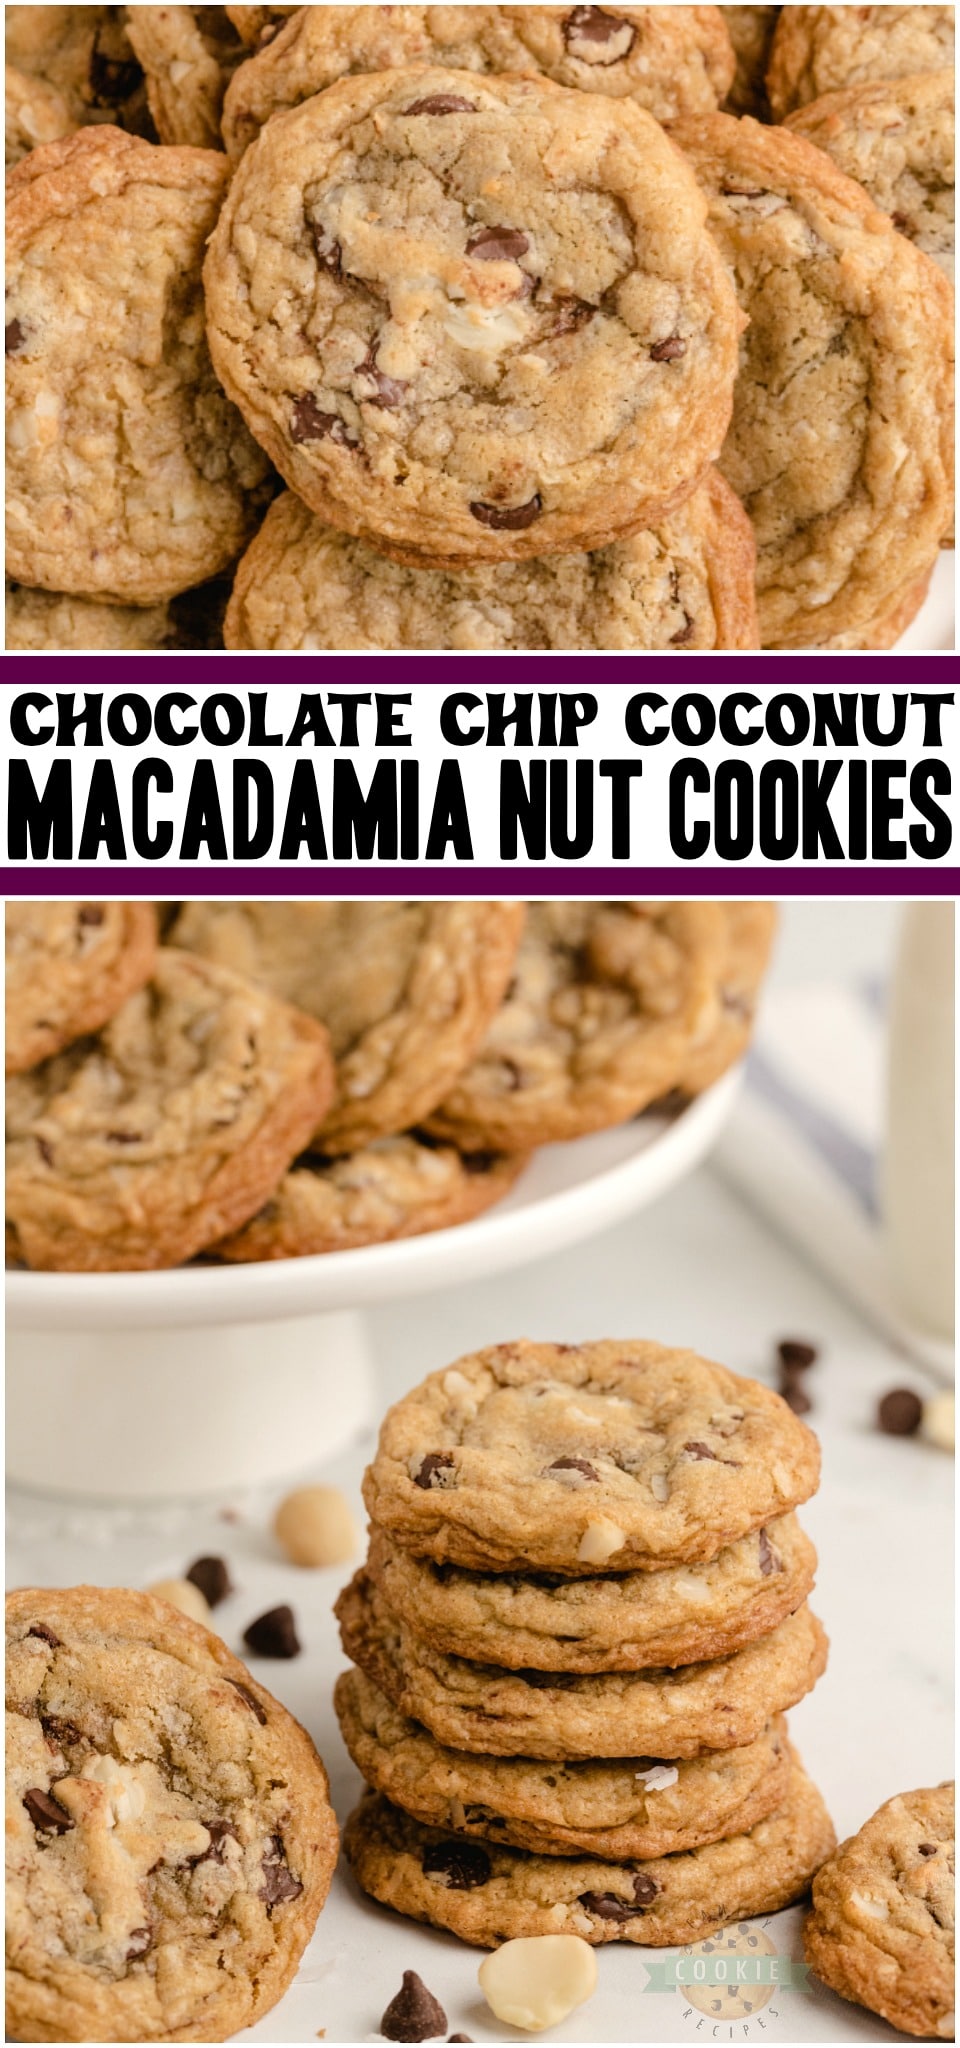 Chocolate chip macadamia nut cookies are soft & chewy cookies loaded with sweet chocolate and nuts! These Coconut Macadamia Nut Cookies are perfect for chocolate chip lovers who want to try something a bit different.